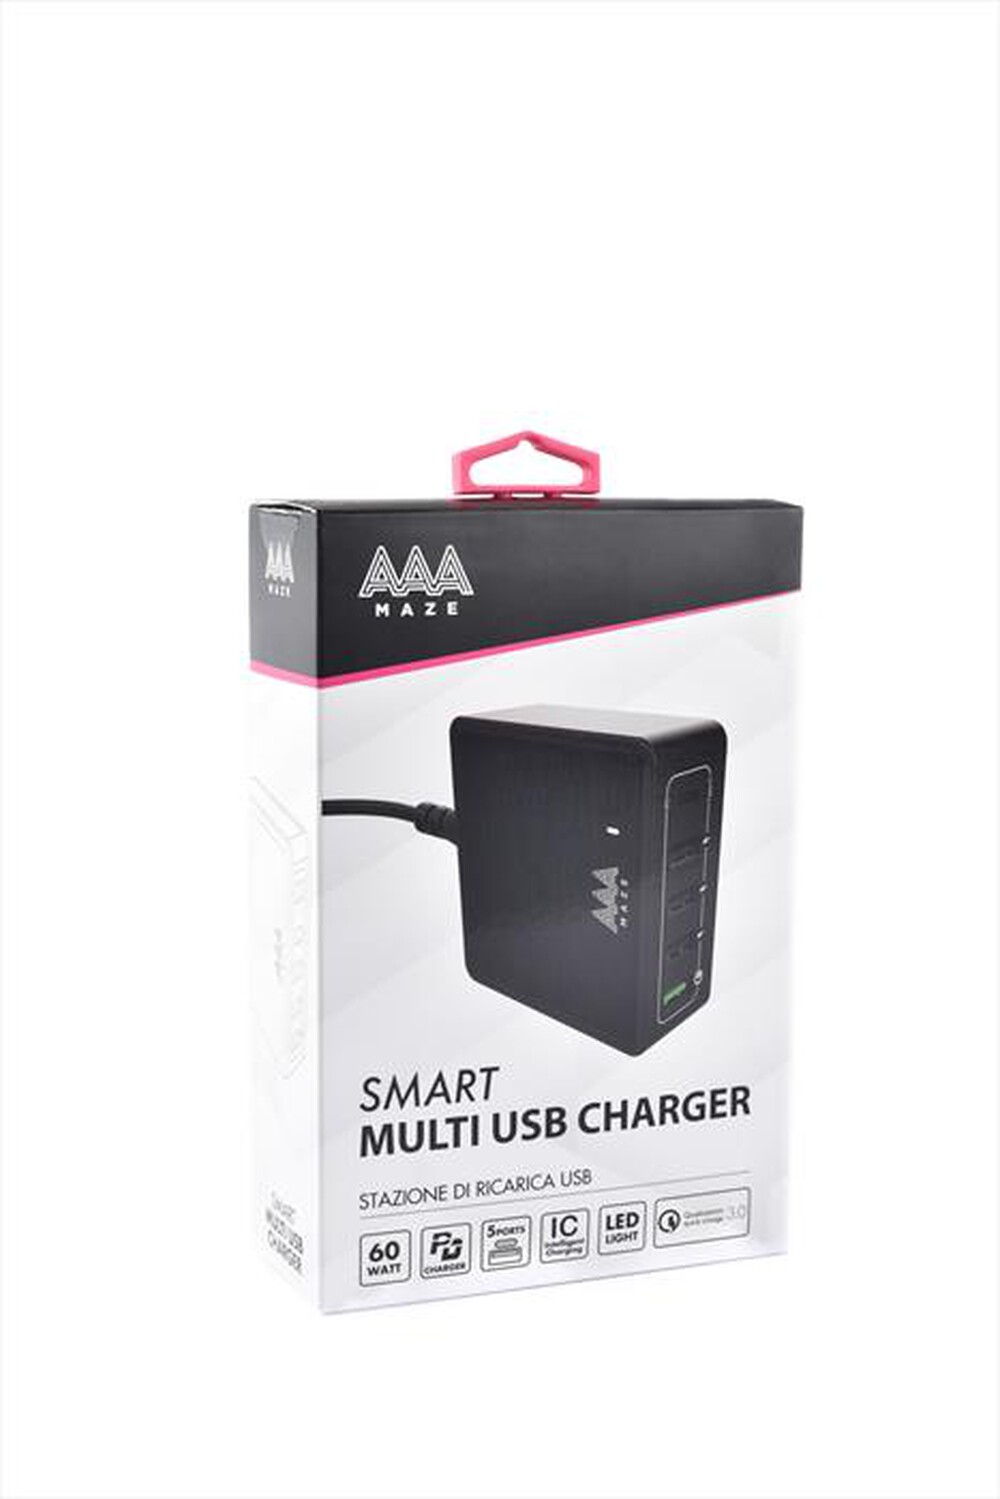 "AAAMAZE - MULTI CHARGER USB CON TYPE-C"